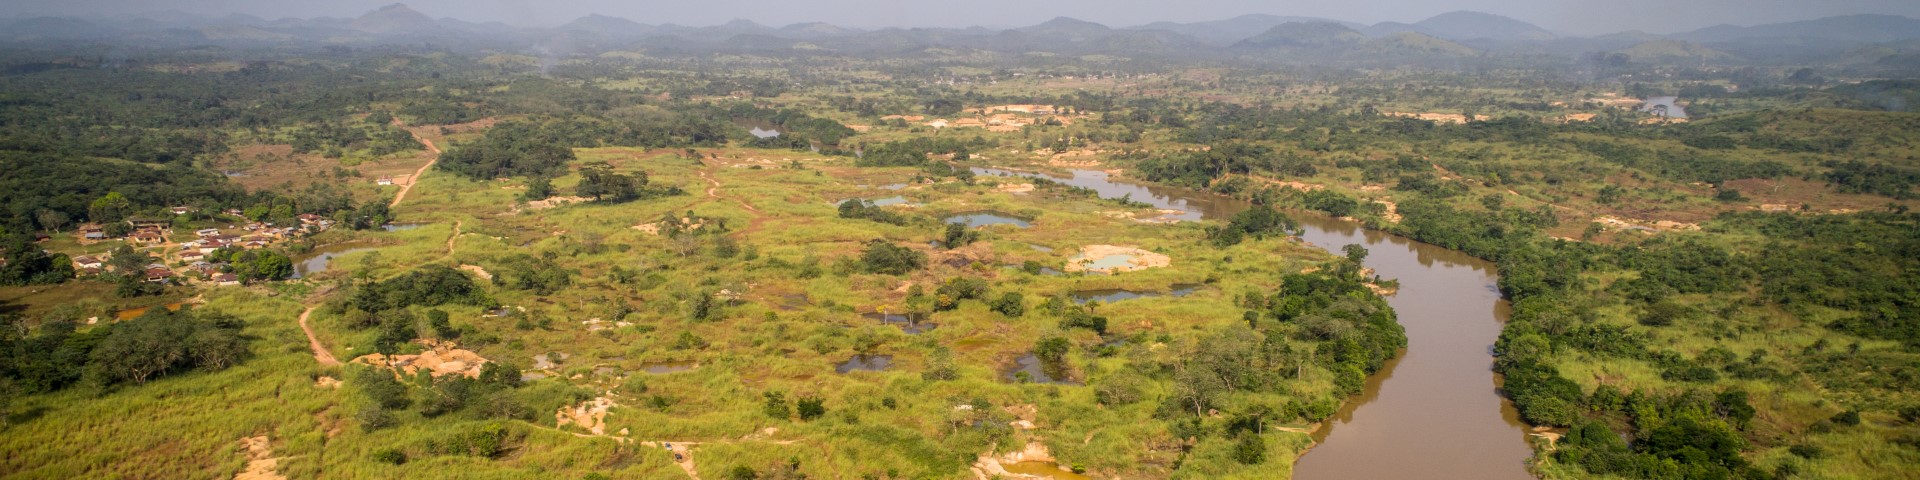 The Mano River as it meanders through the green landscape of Sierra Leone. Copyright: GIZ / Michael Duff